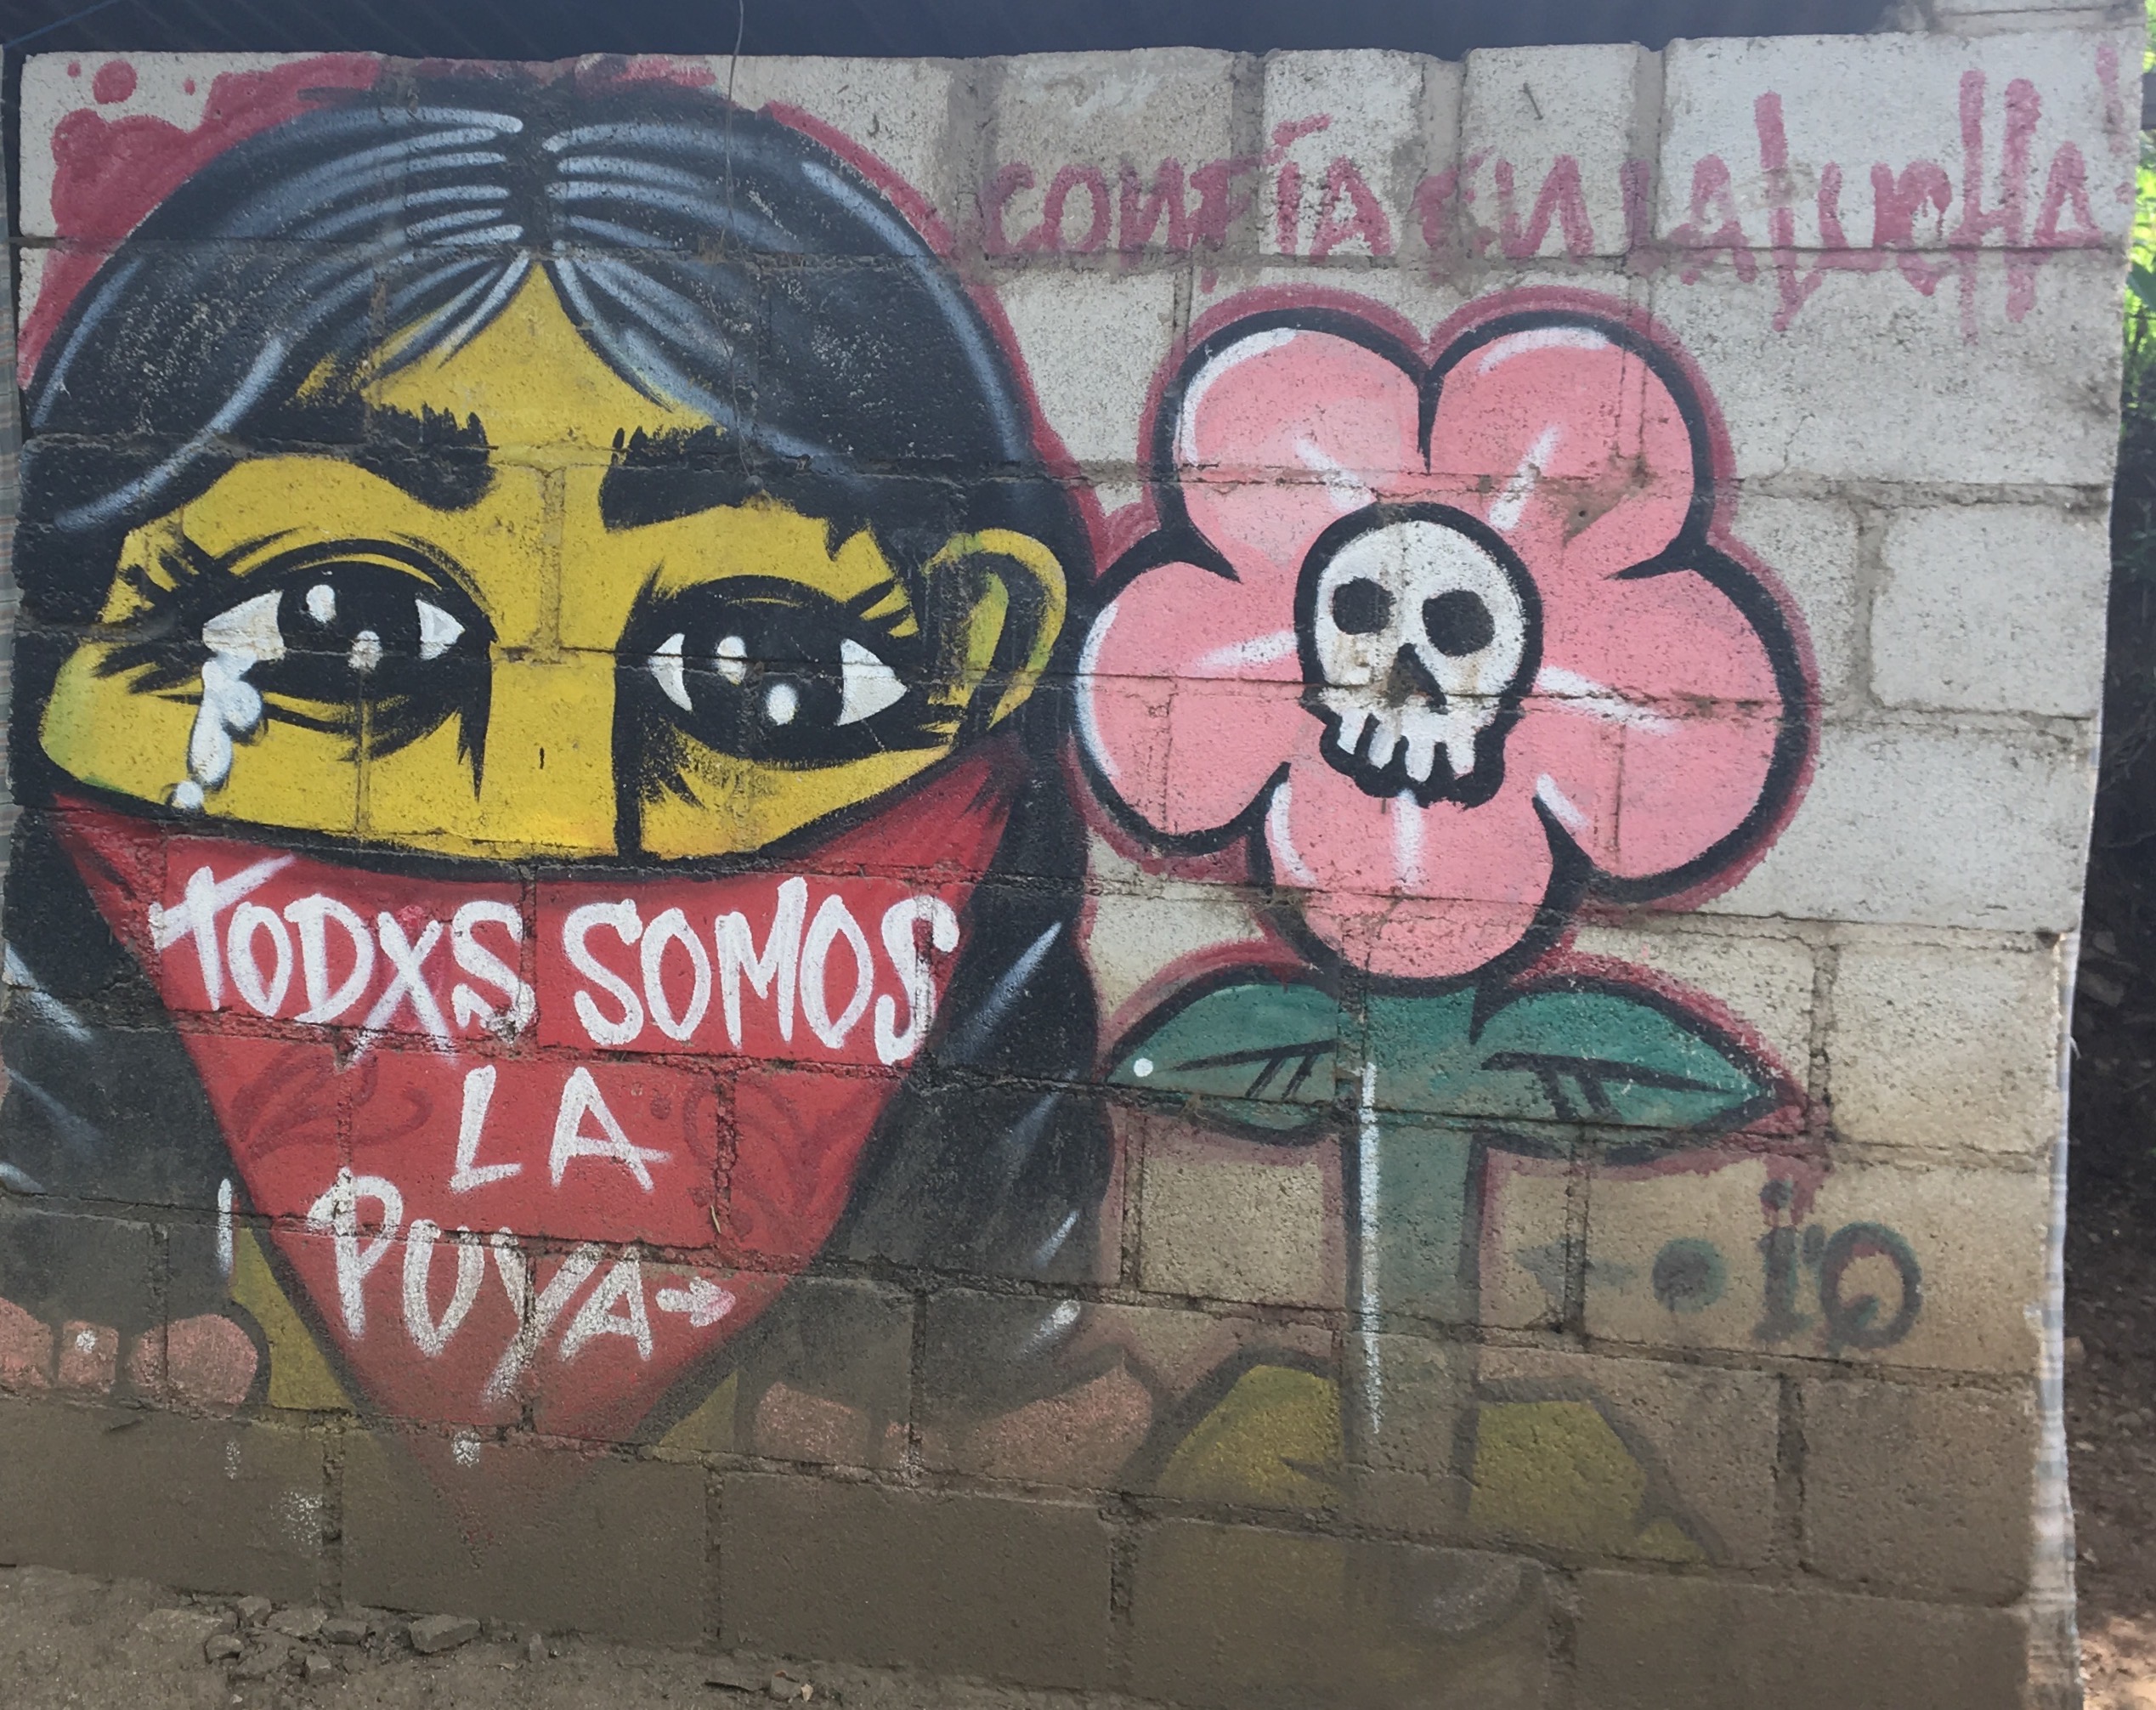 This photo shows popular art on a wall saying “Todos somos la puya” (We are all The Thorn”) inspired by the resistance to the Tambor gold mine in Guatemala. Photo: Catherine Nolin